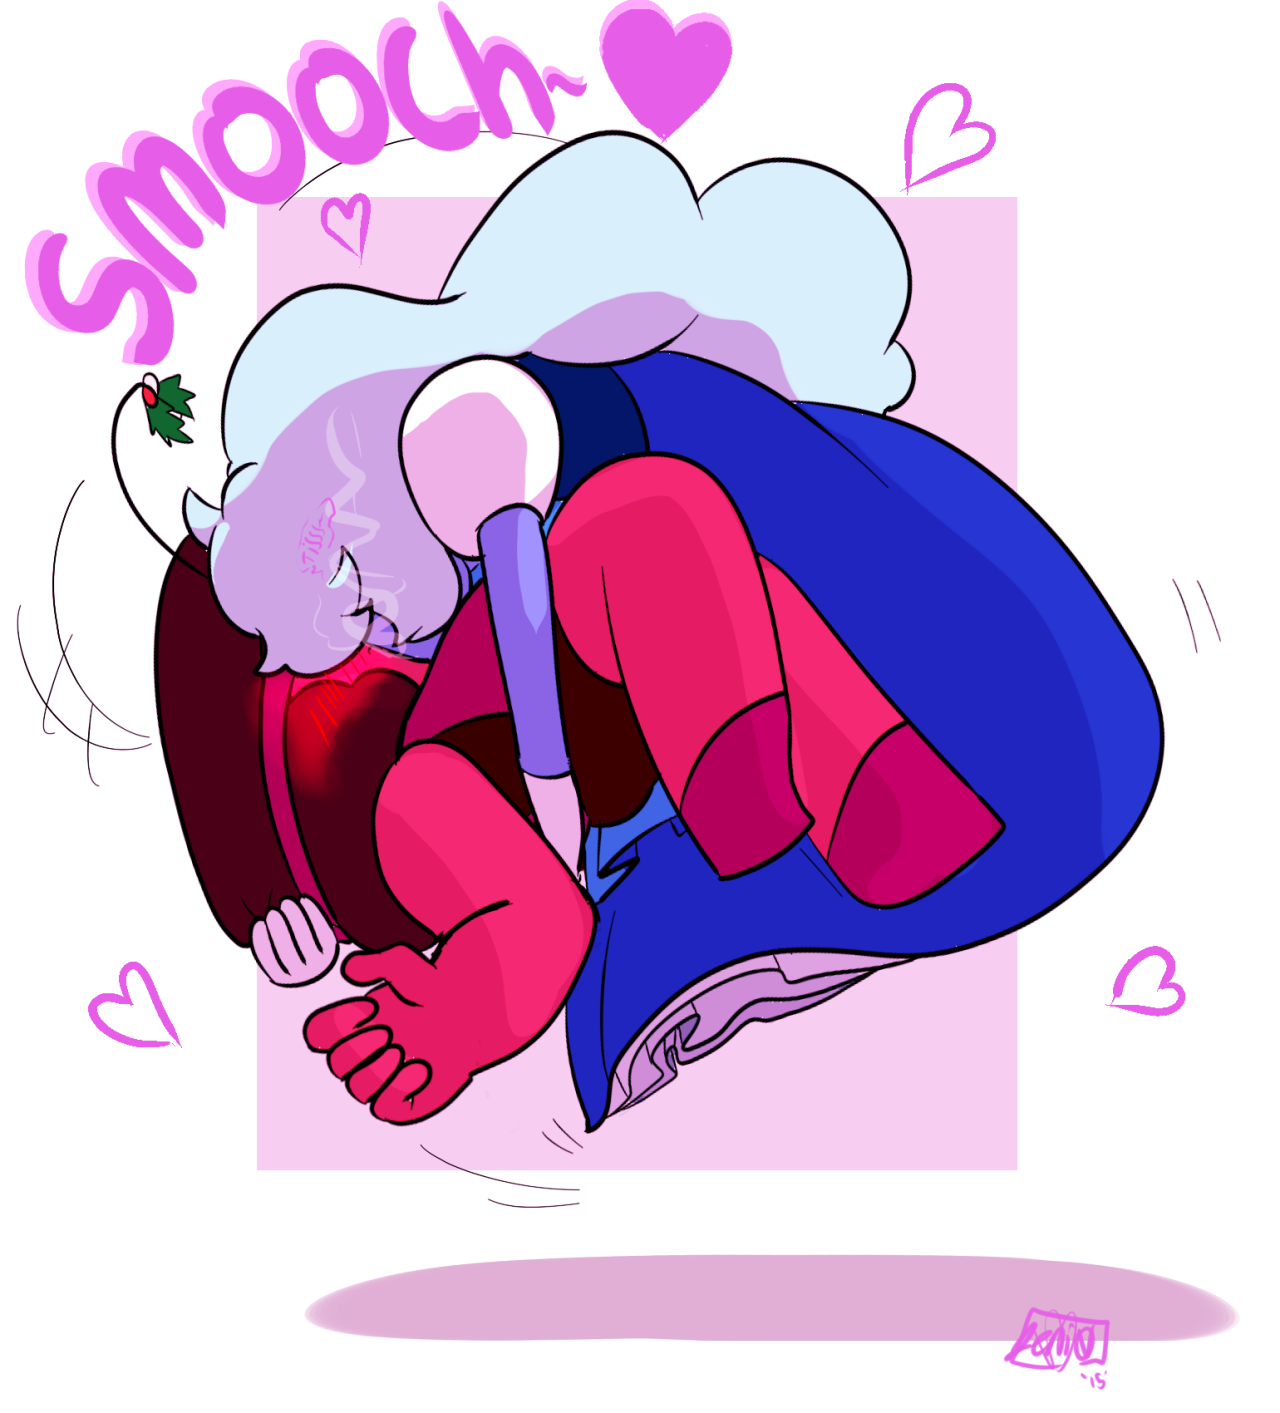 Happy Holidays, have some smoochies!